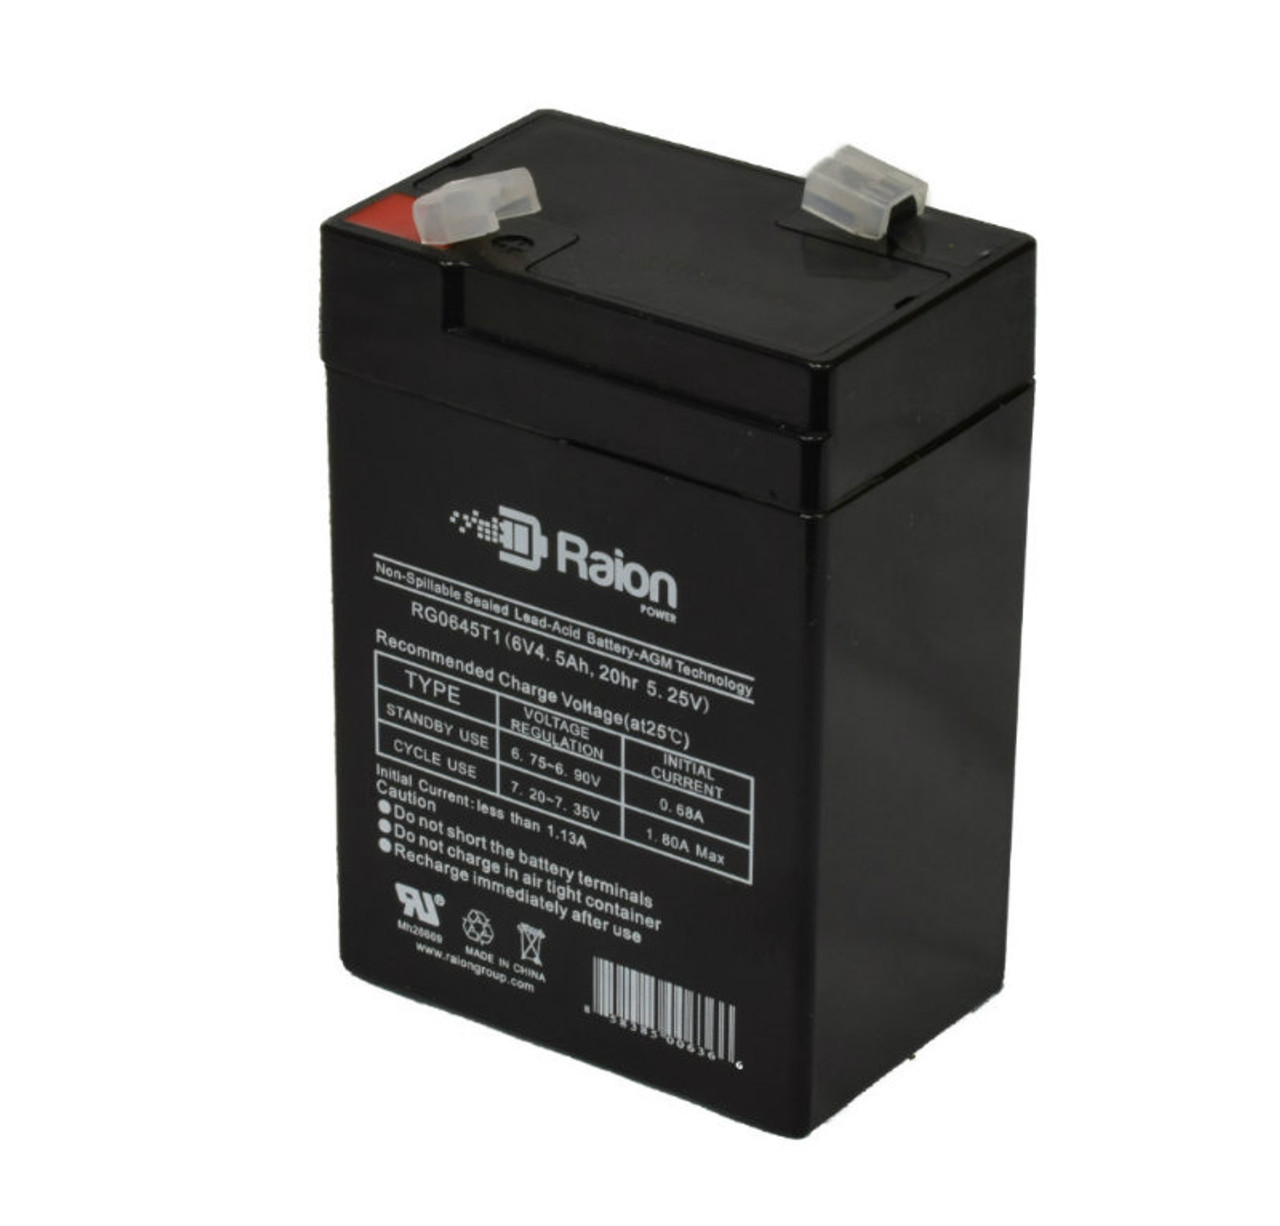 Raion Power RG0645T1 6V 4.5Ah Replacement Battery Cartridge for Power Patrol BSL0905